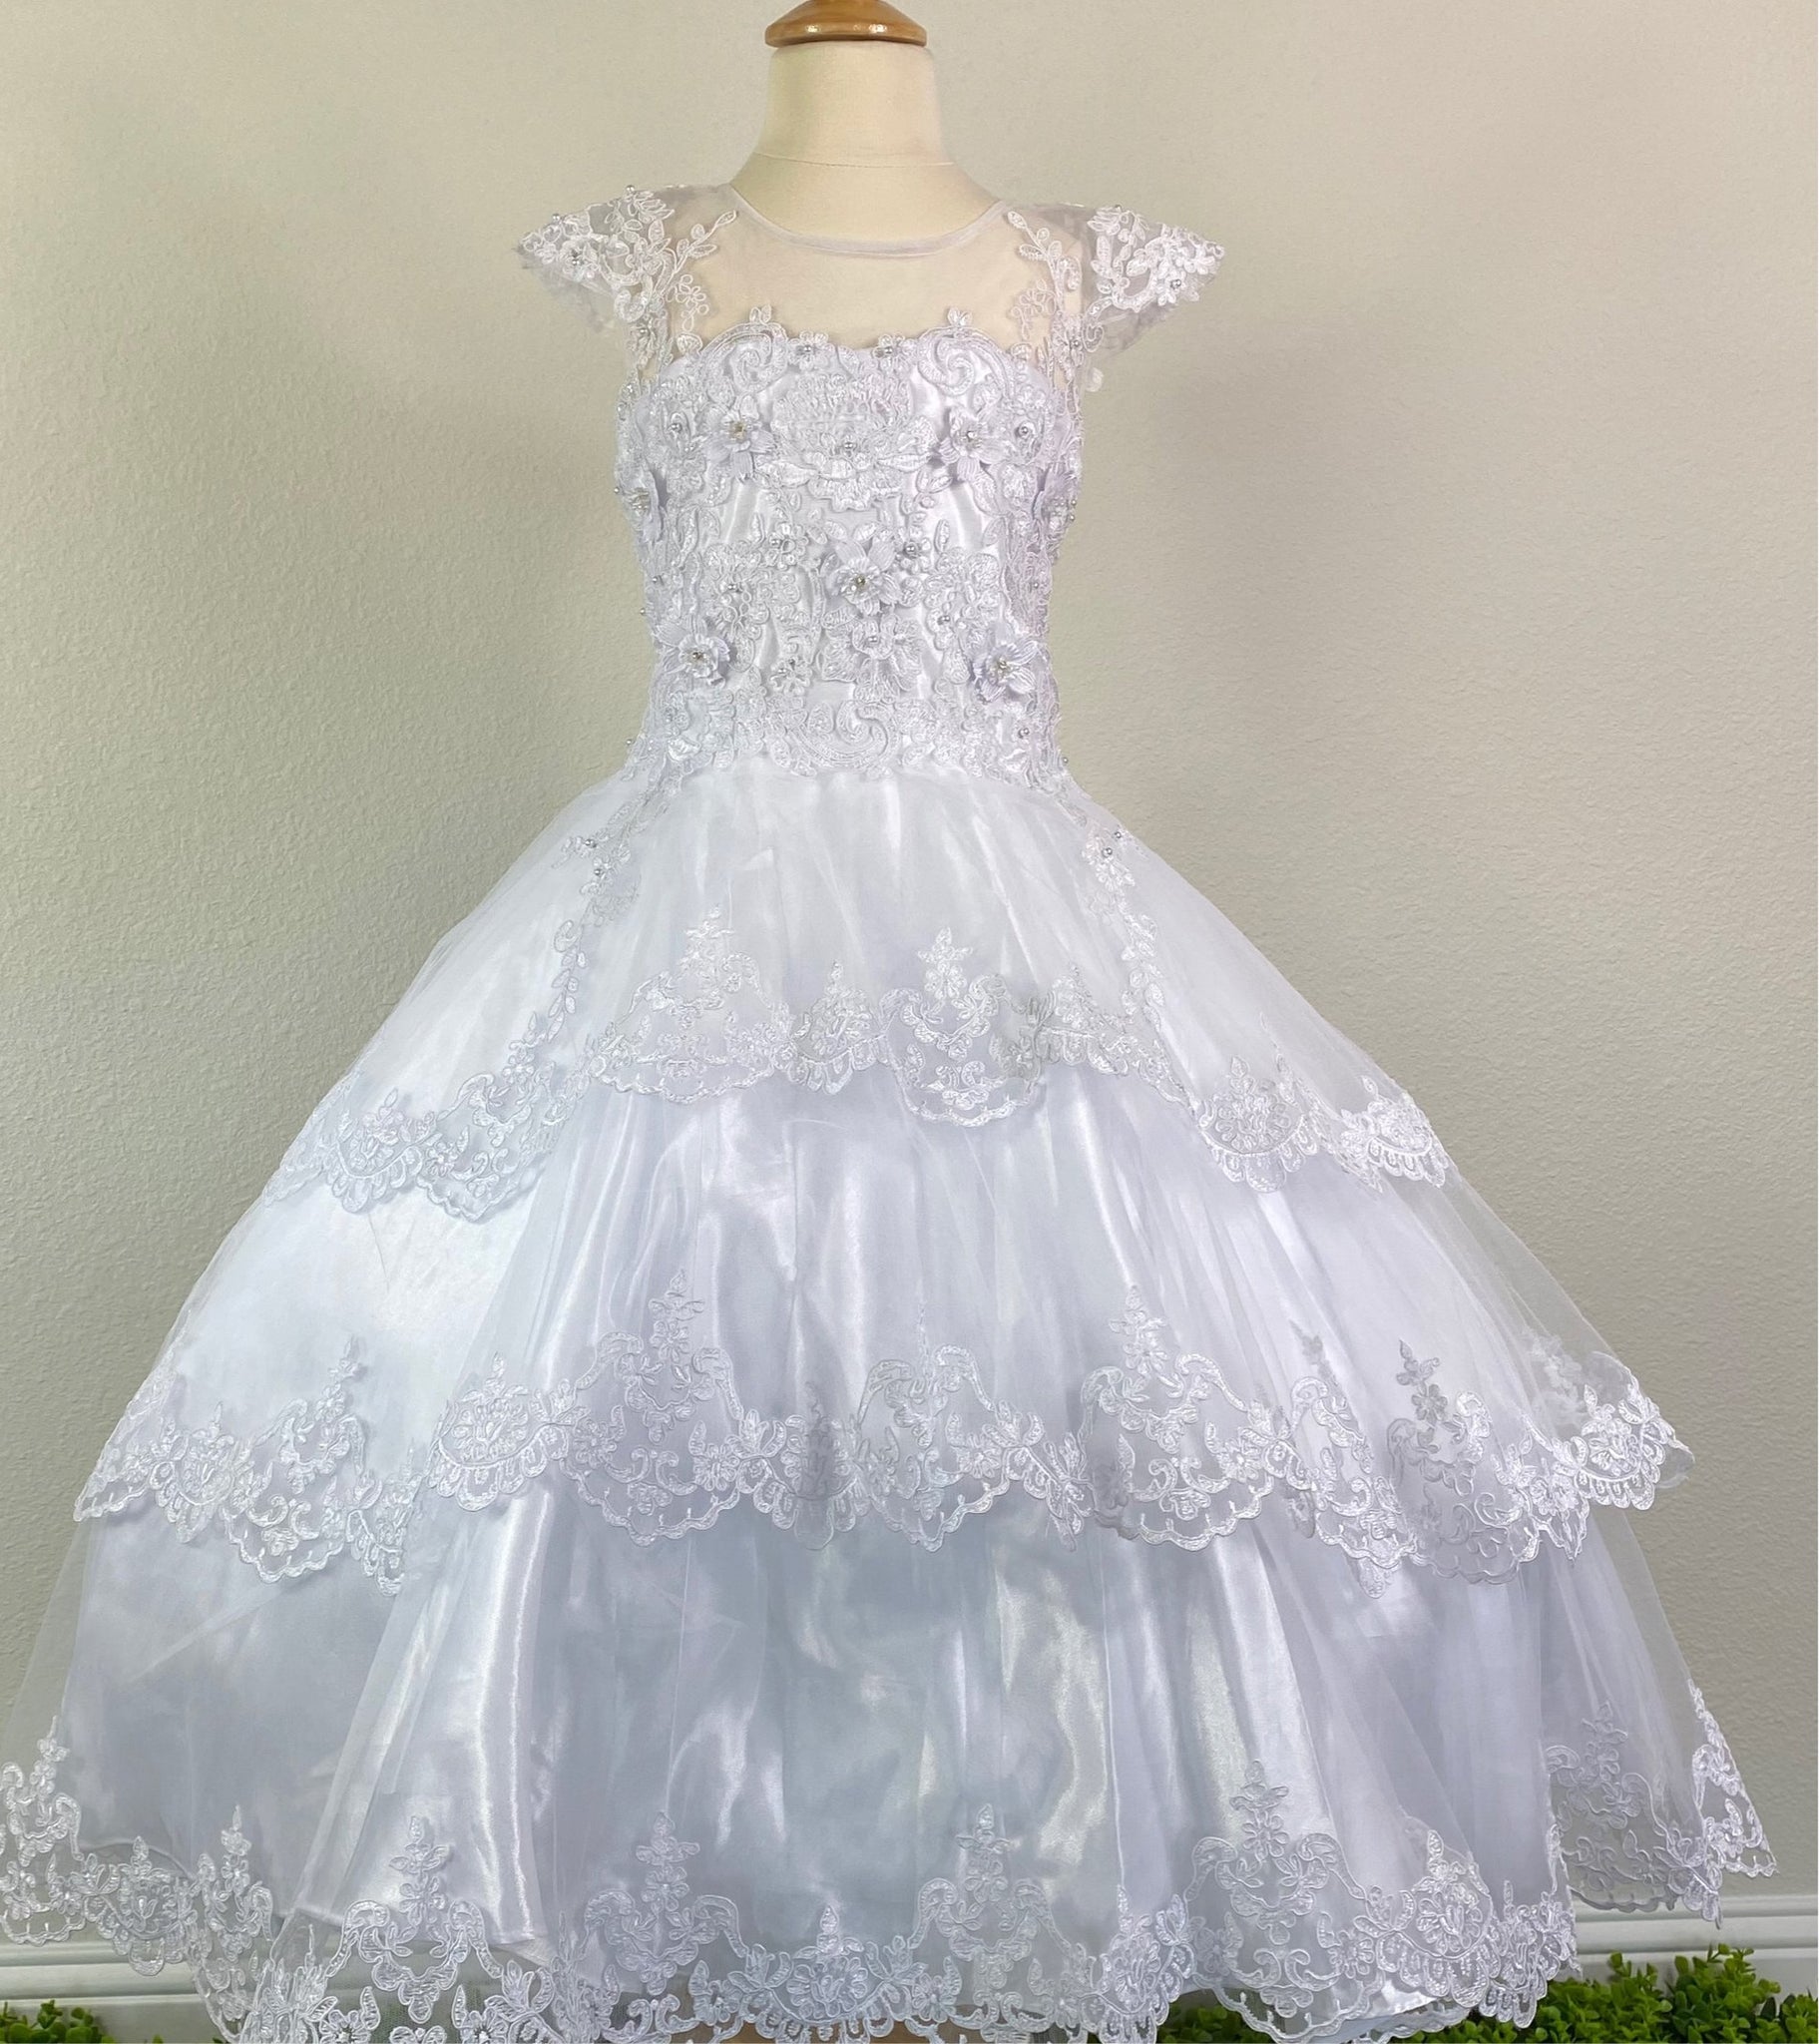 White, size 10 Satin trimmed cap sleeve with scoop neck Floral and lace illusion bodice with pearls and crystals Three-tiered embroidered lace trimmed skirt over satin underlay Zipper closure Satin ribbon for bow Short train